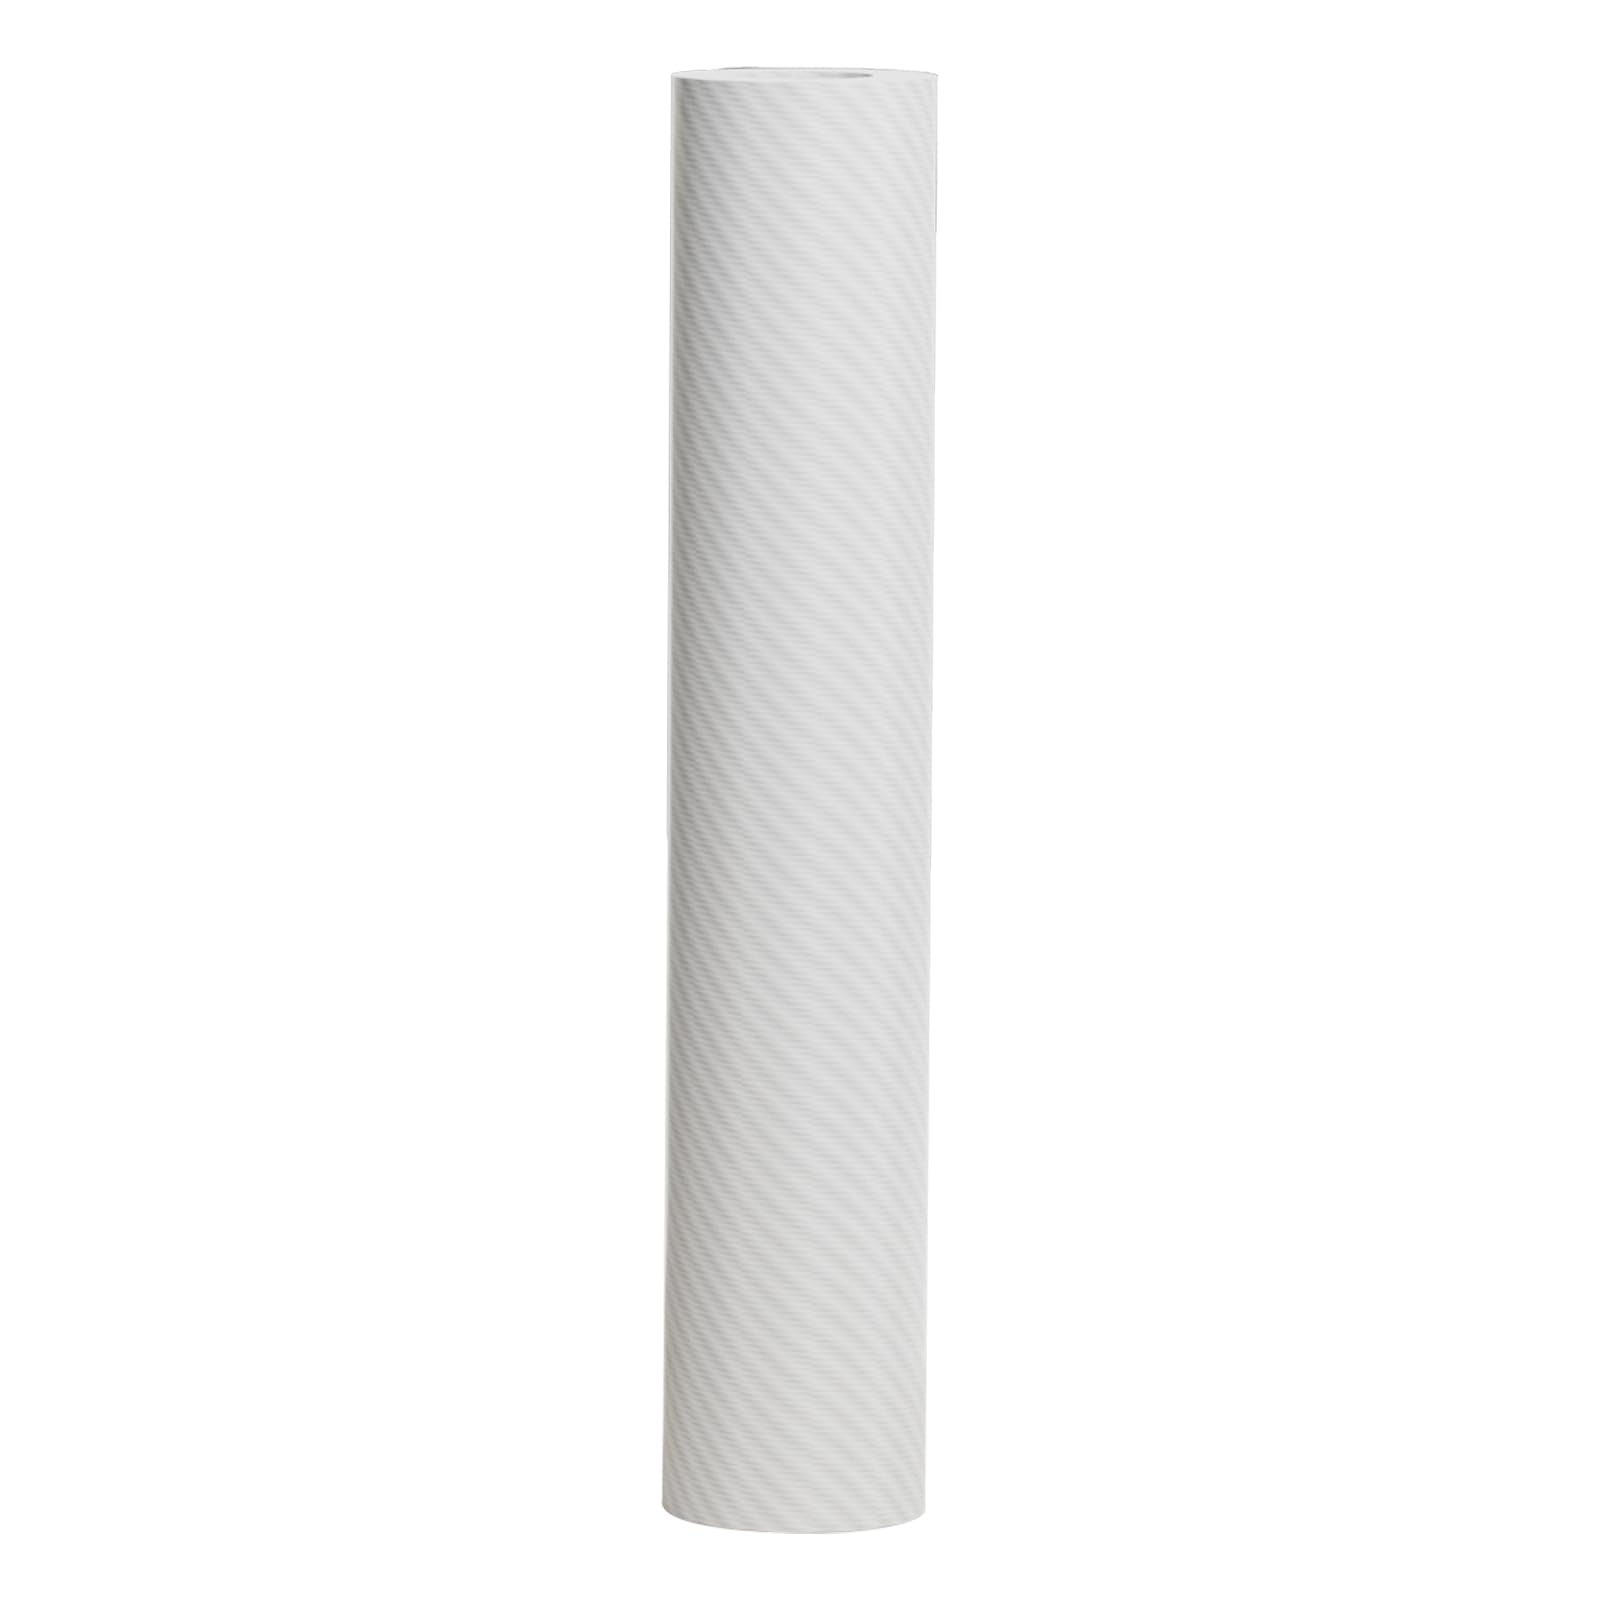 PP Replacement Filter Compatible with U1 Under Sink Water Filter,Vortopt 